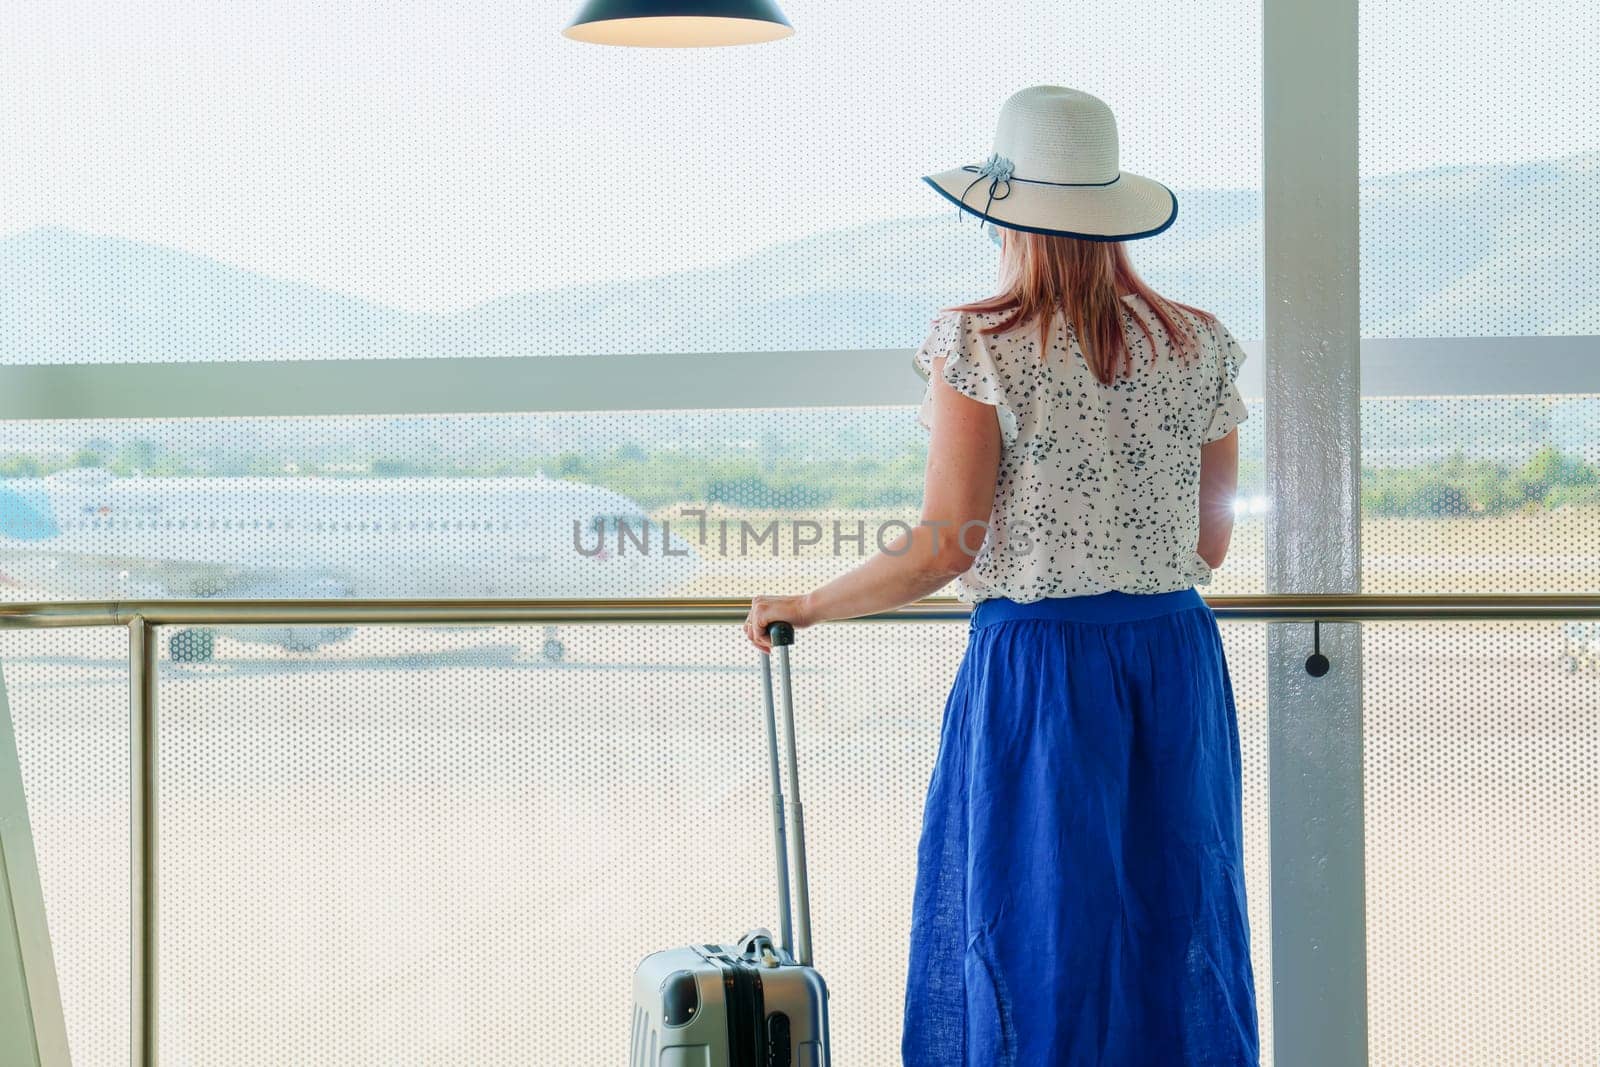 A young girl standing by a wide airport window, looking out at the runway and reflecting on her upcoming vacation. The natural light creates a serene atmosphere as the girl gazes outside.